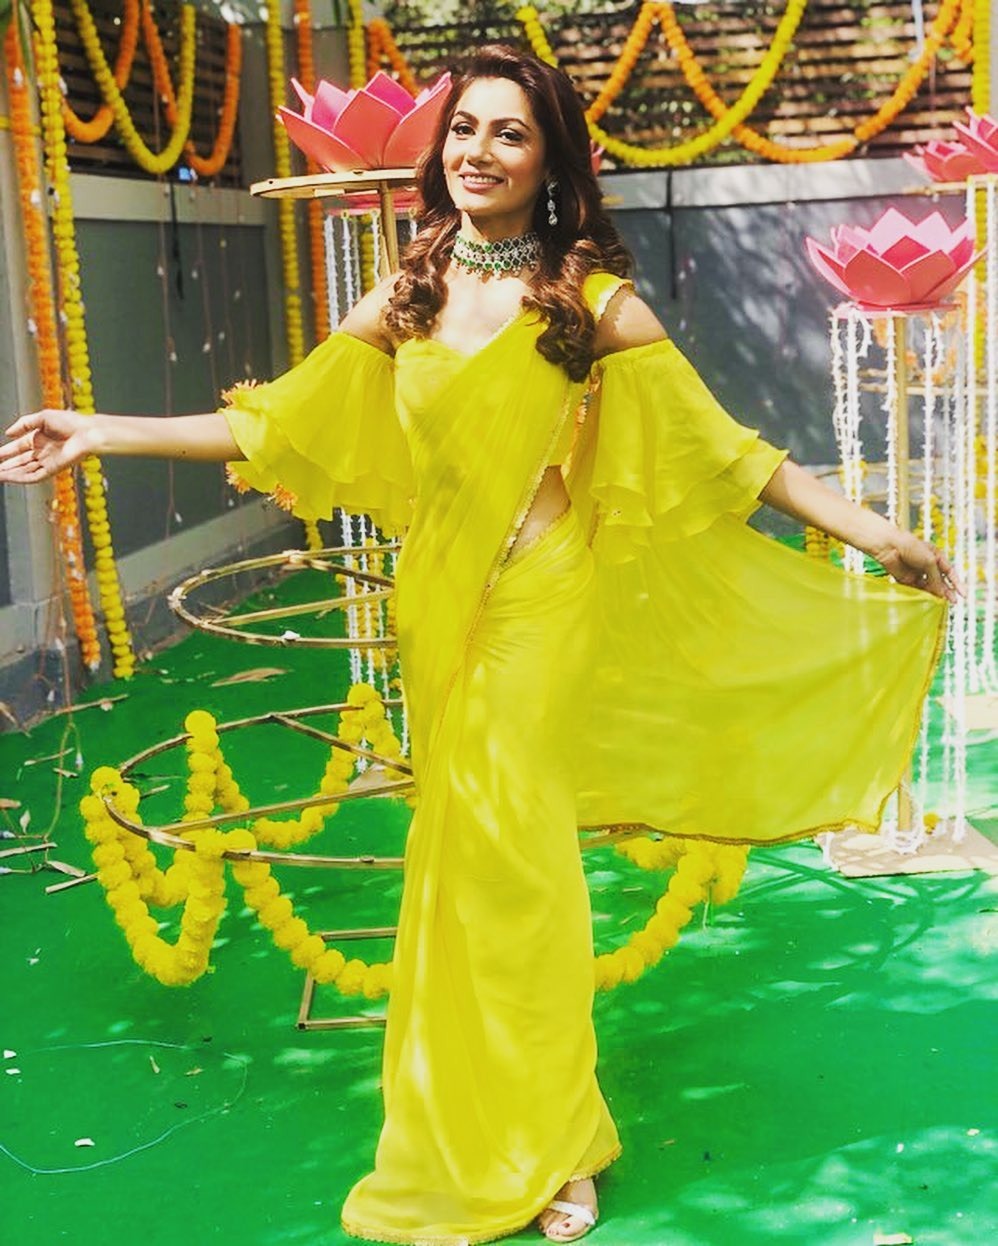 Rupali Ganguly and Sriti Jha looked beautiful in yellow sari, fans expressed their love 2960